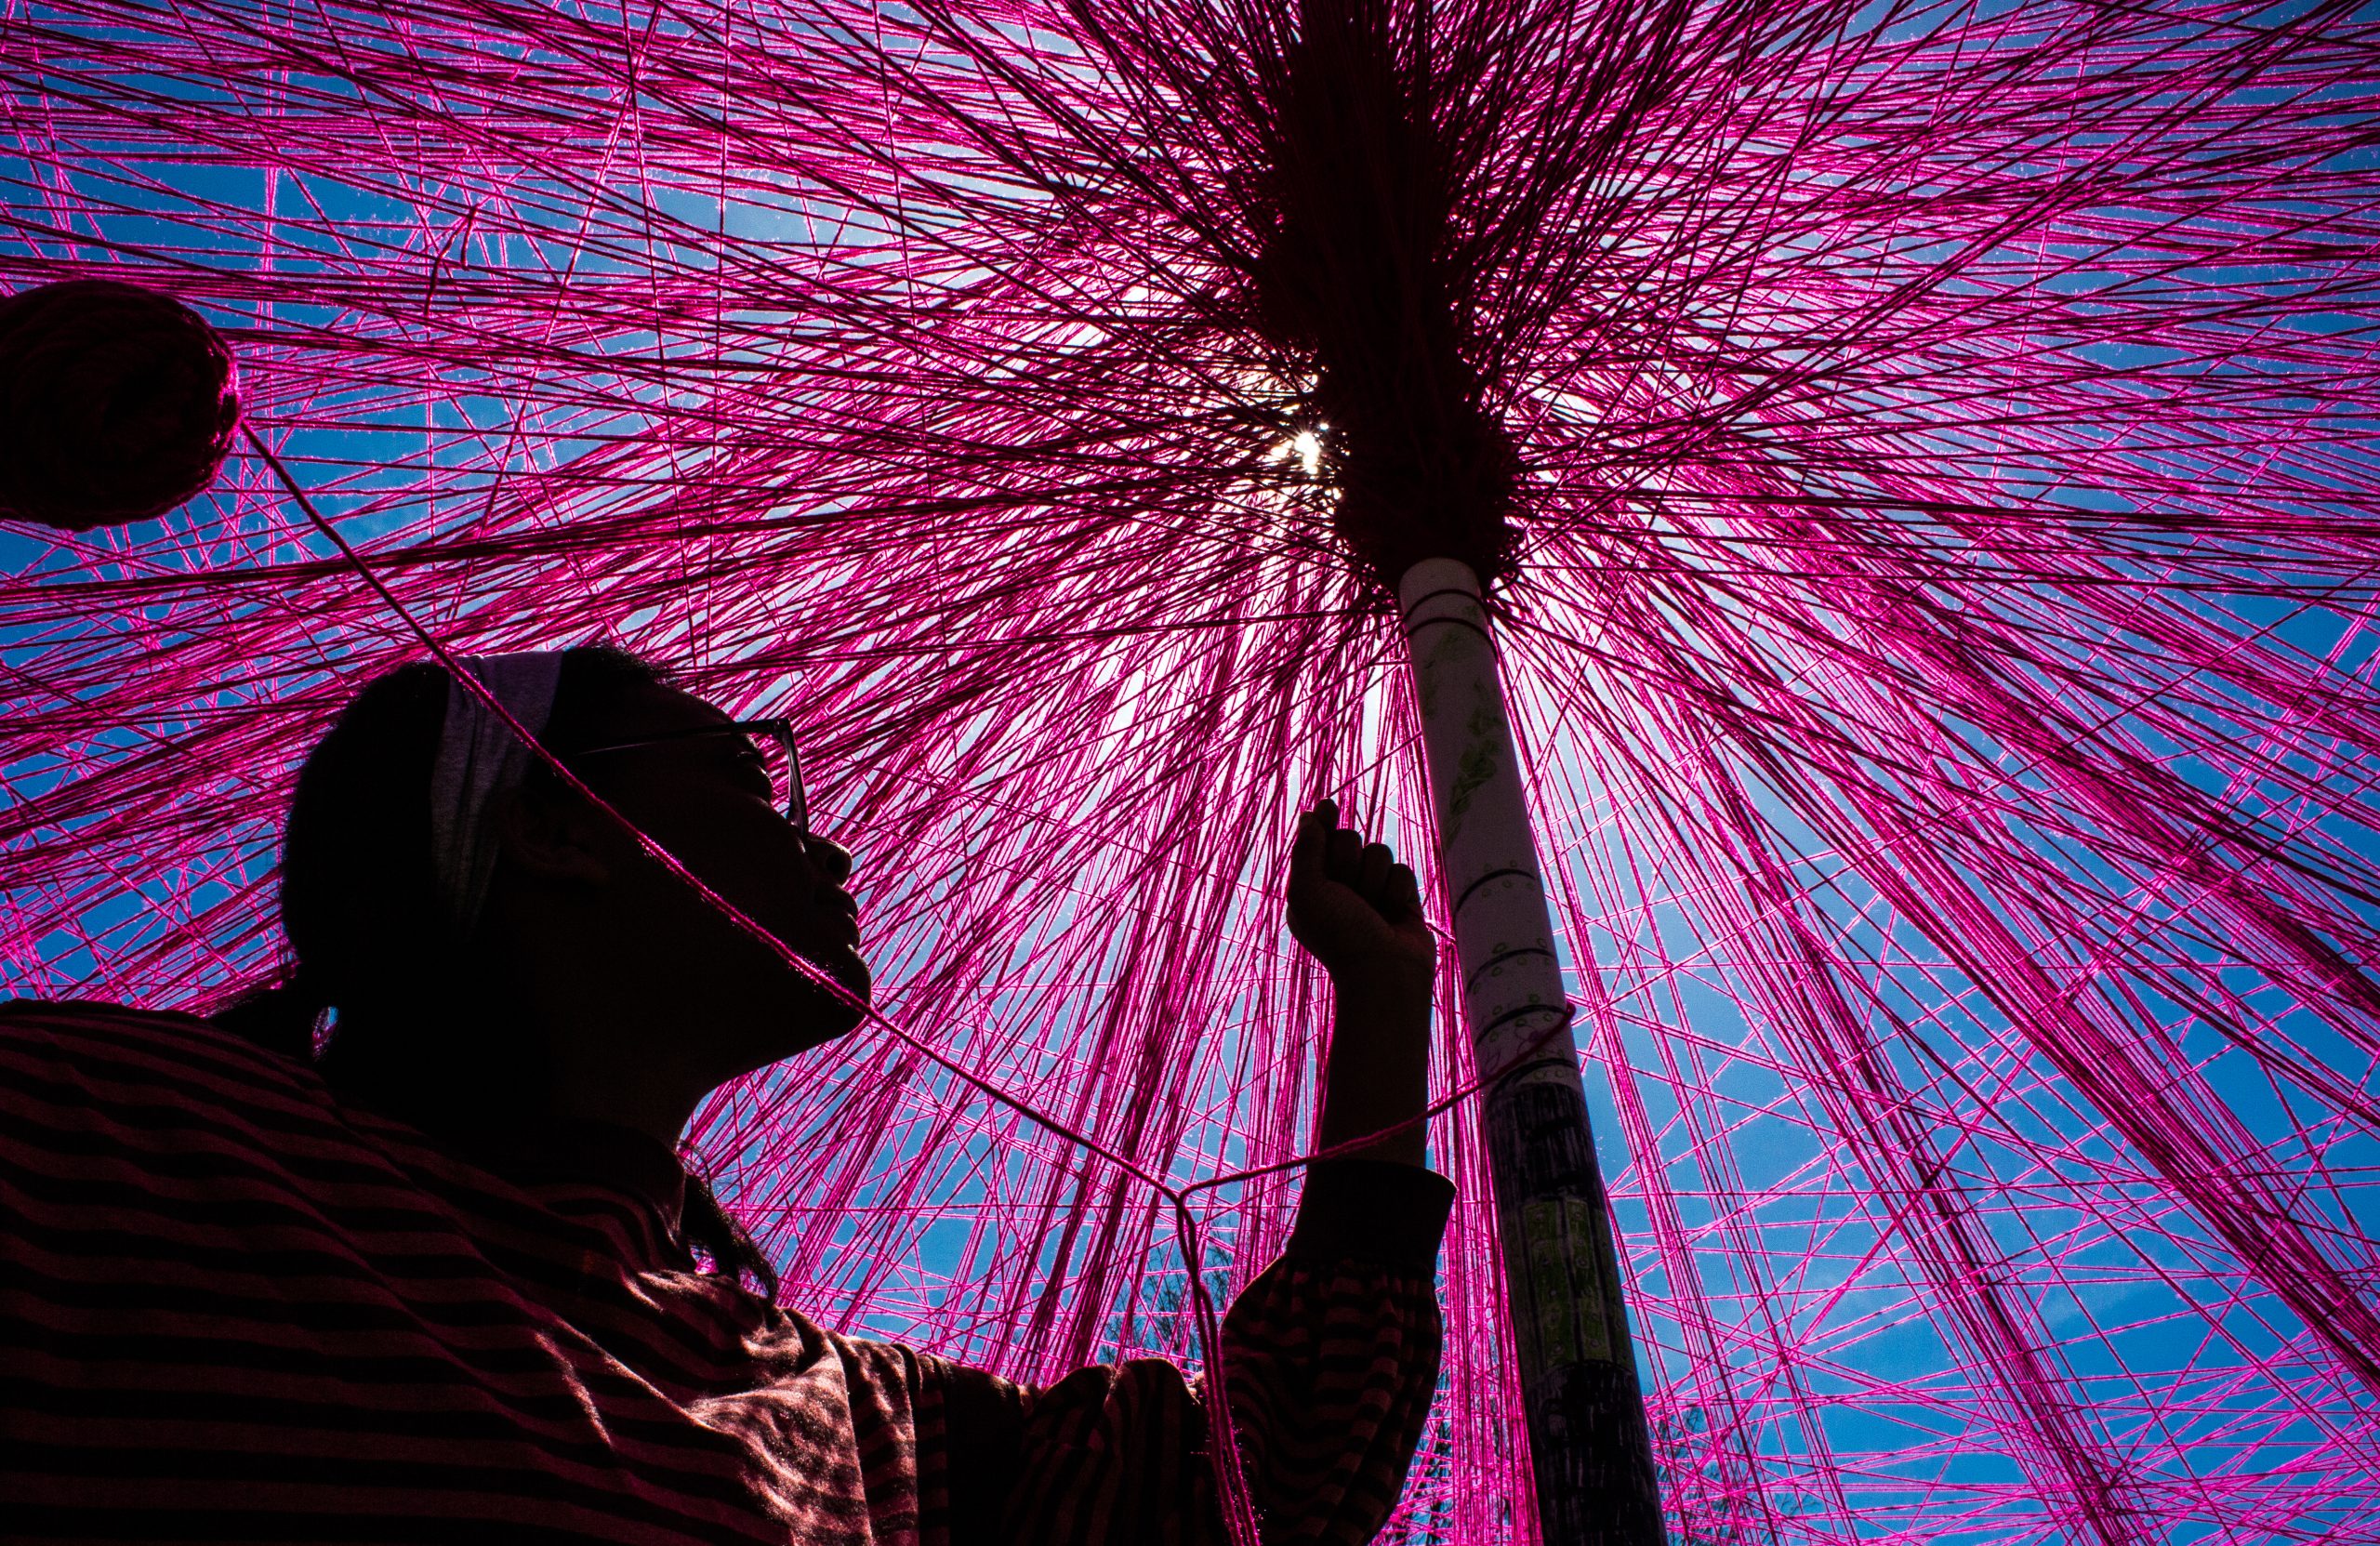 A person working on an installation art piece made of pink threads